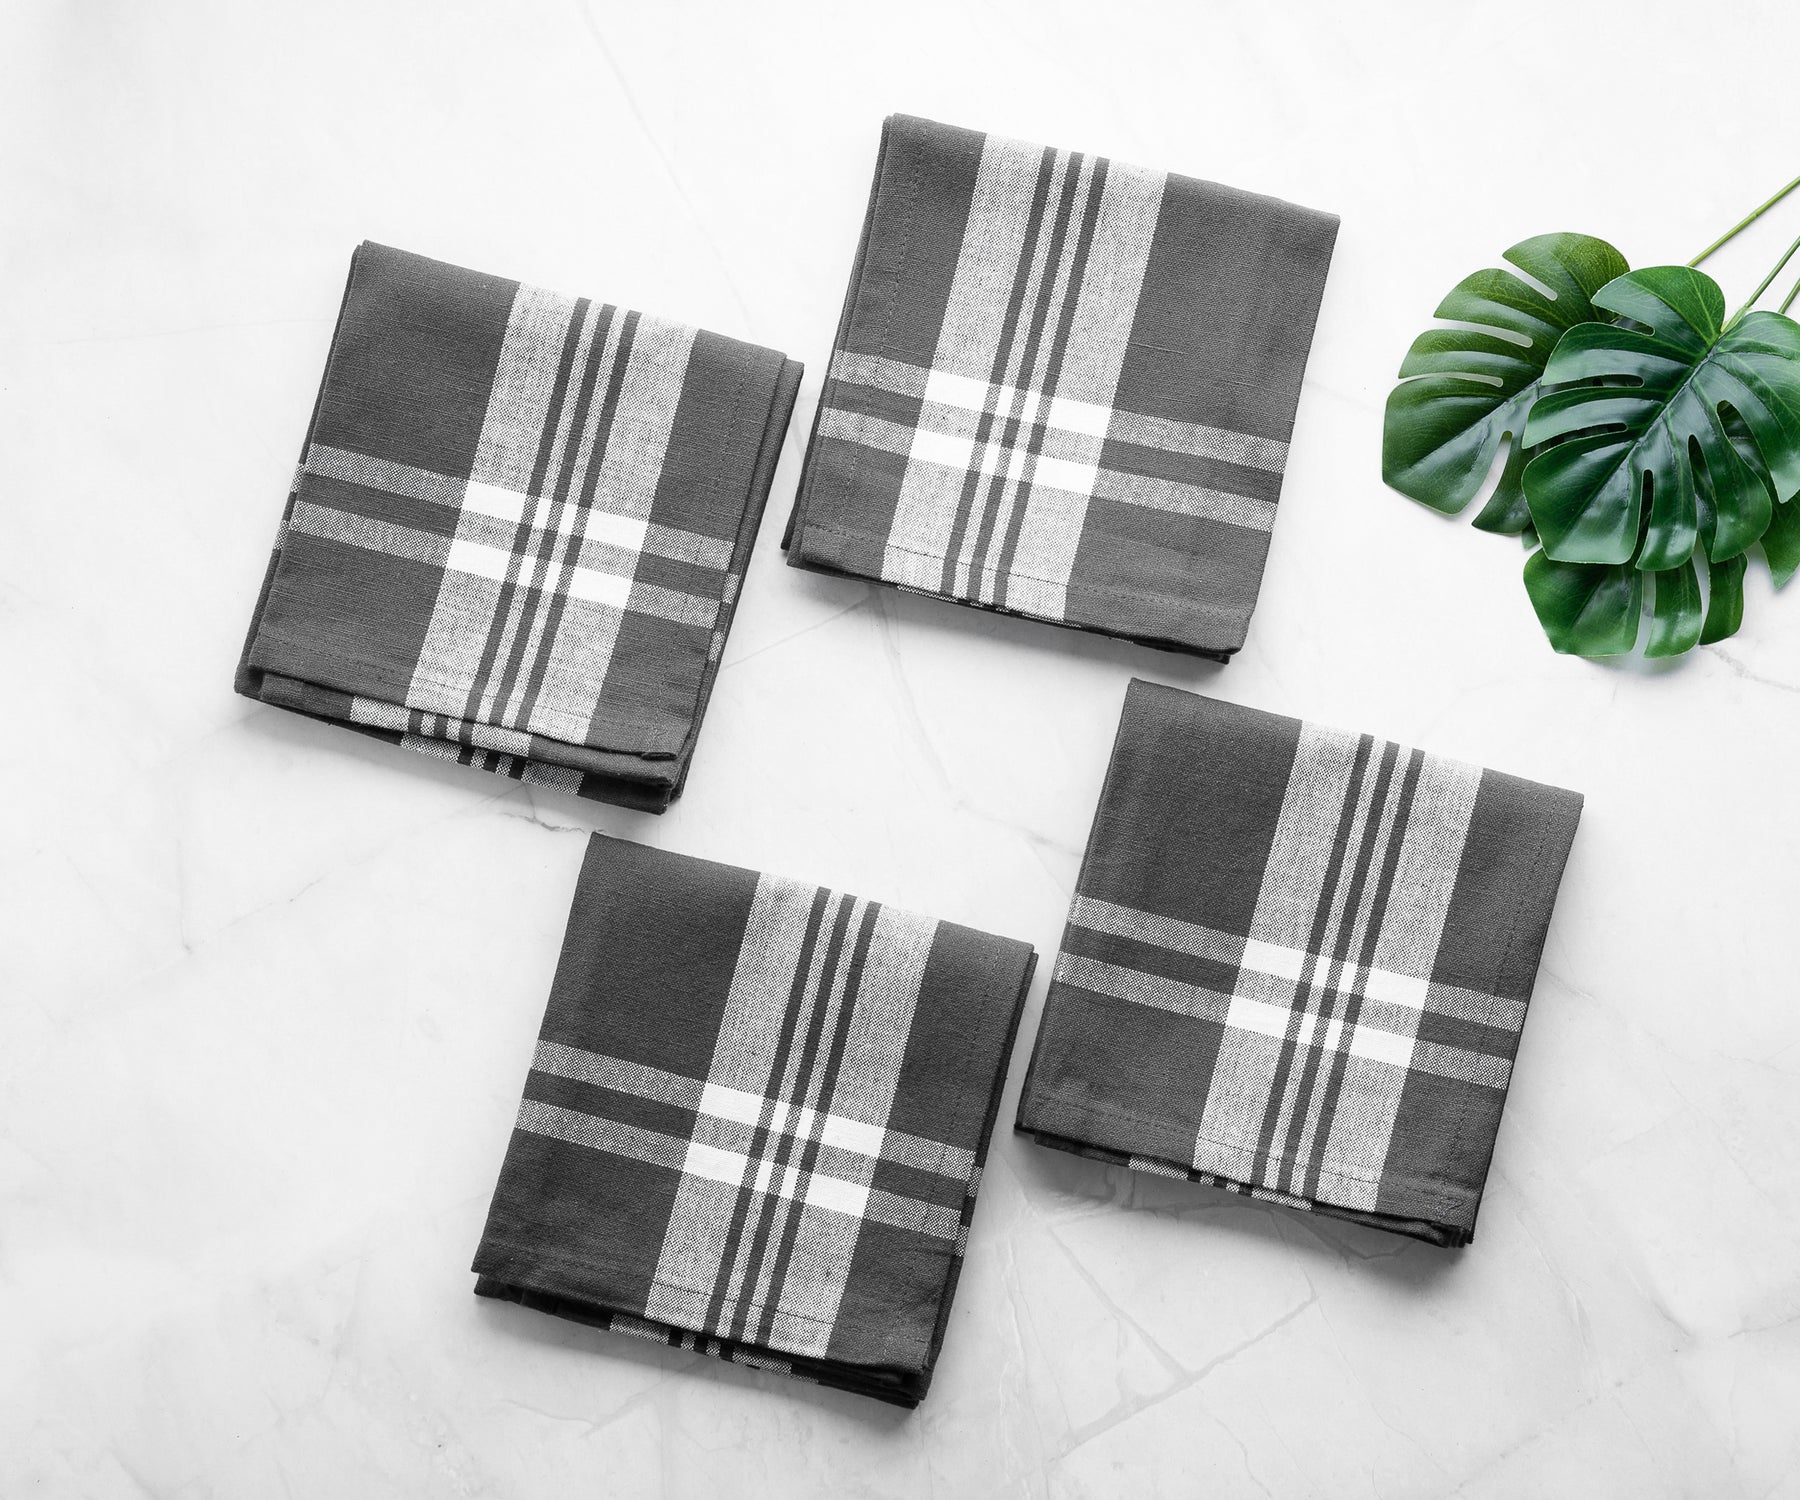 Black and white checkered farmhouse kitchen towels on a marble countertop